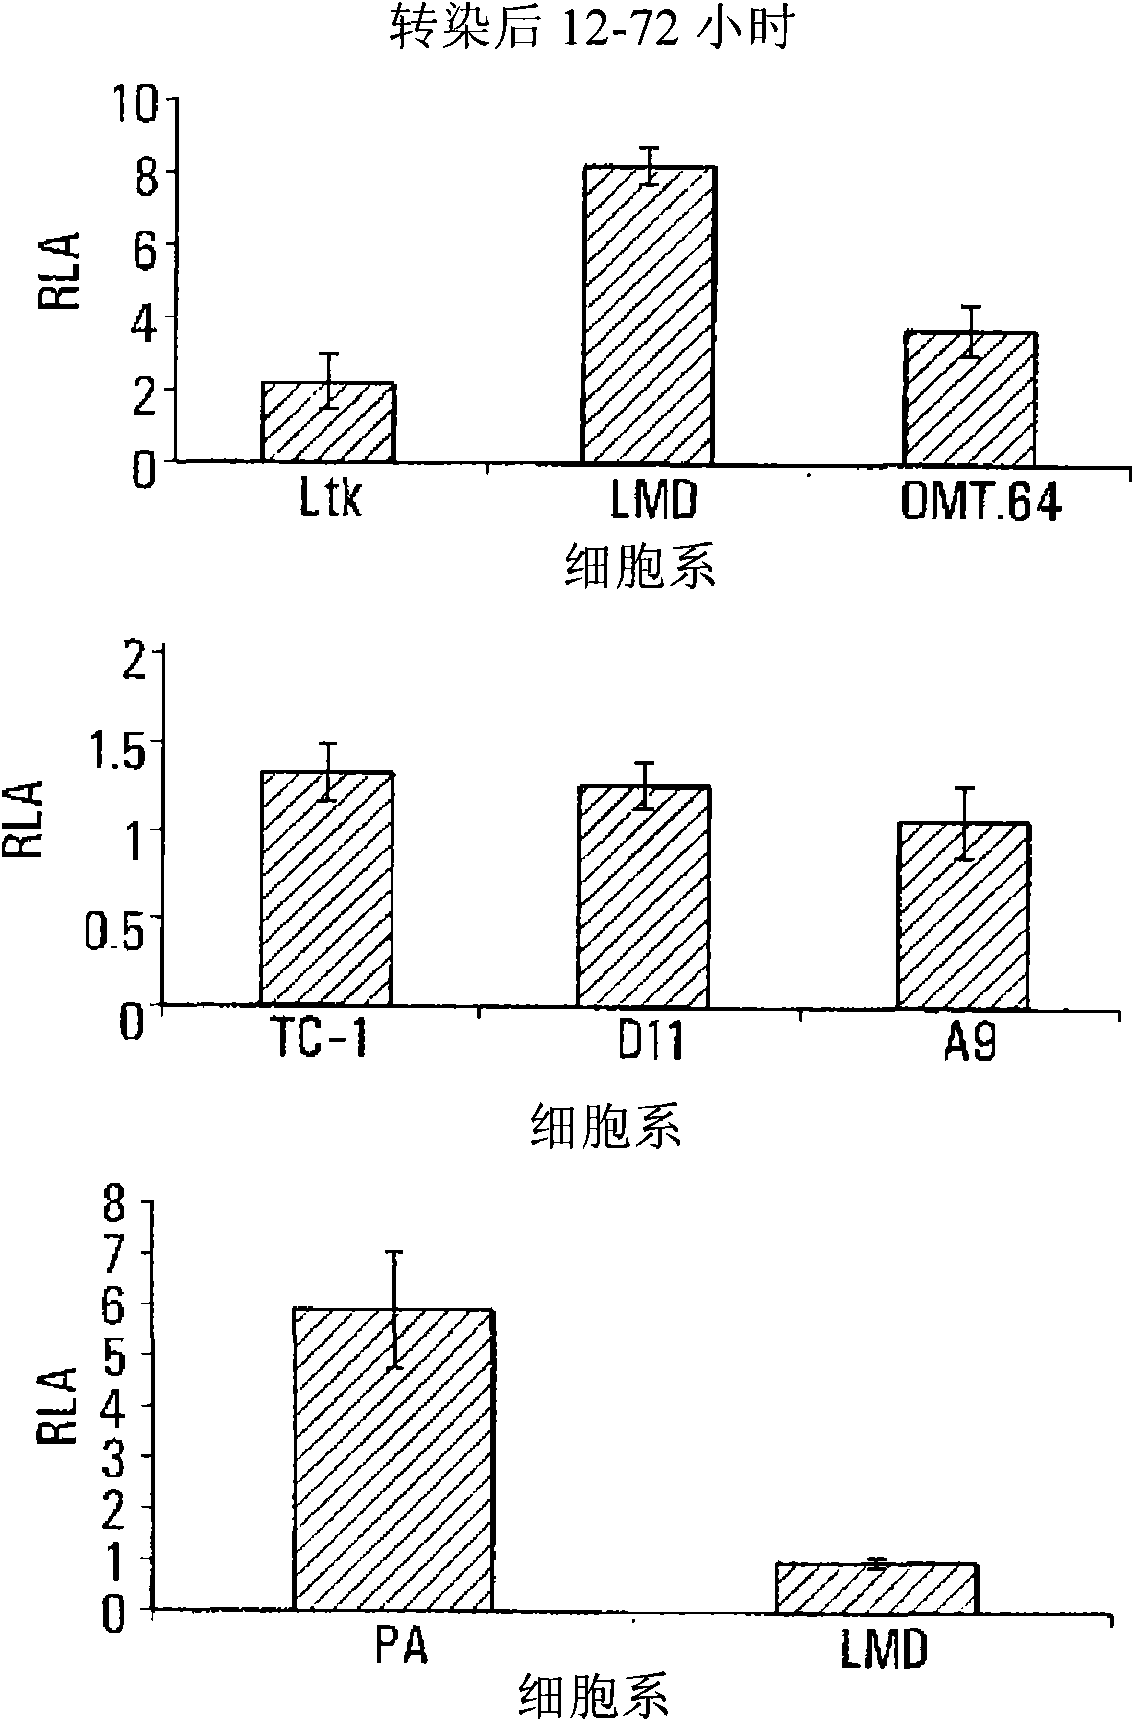 Hat acetylation promoters and uses of compositions thereof in promoting immunogenicity